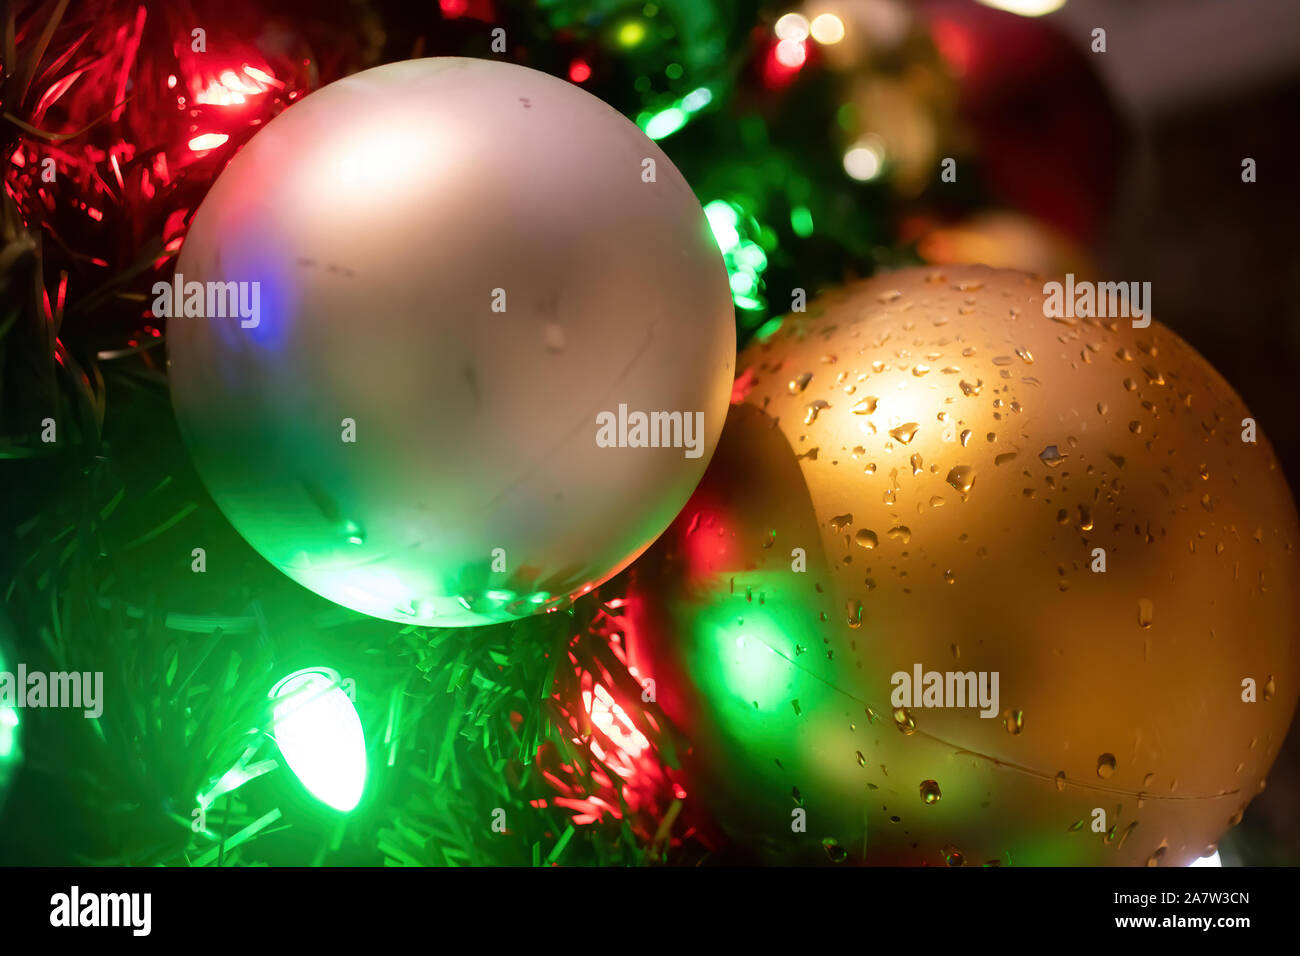 Wet Christmas ornaments and lights on an outdoor tree Stock Photo - Alamy